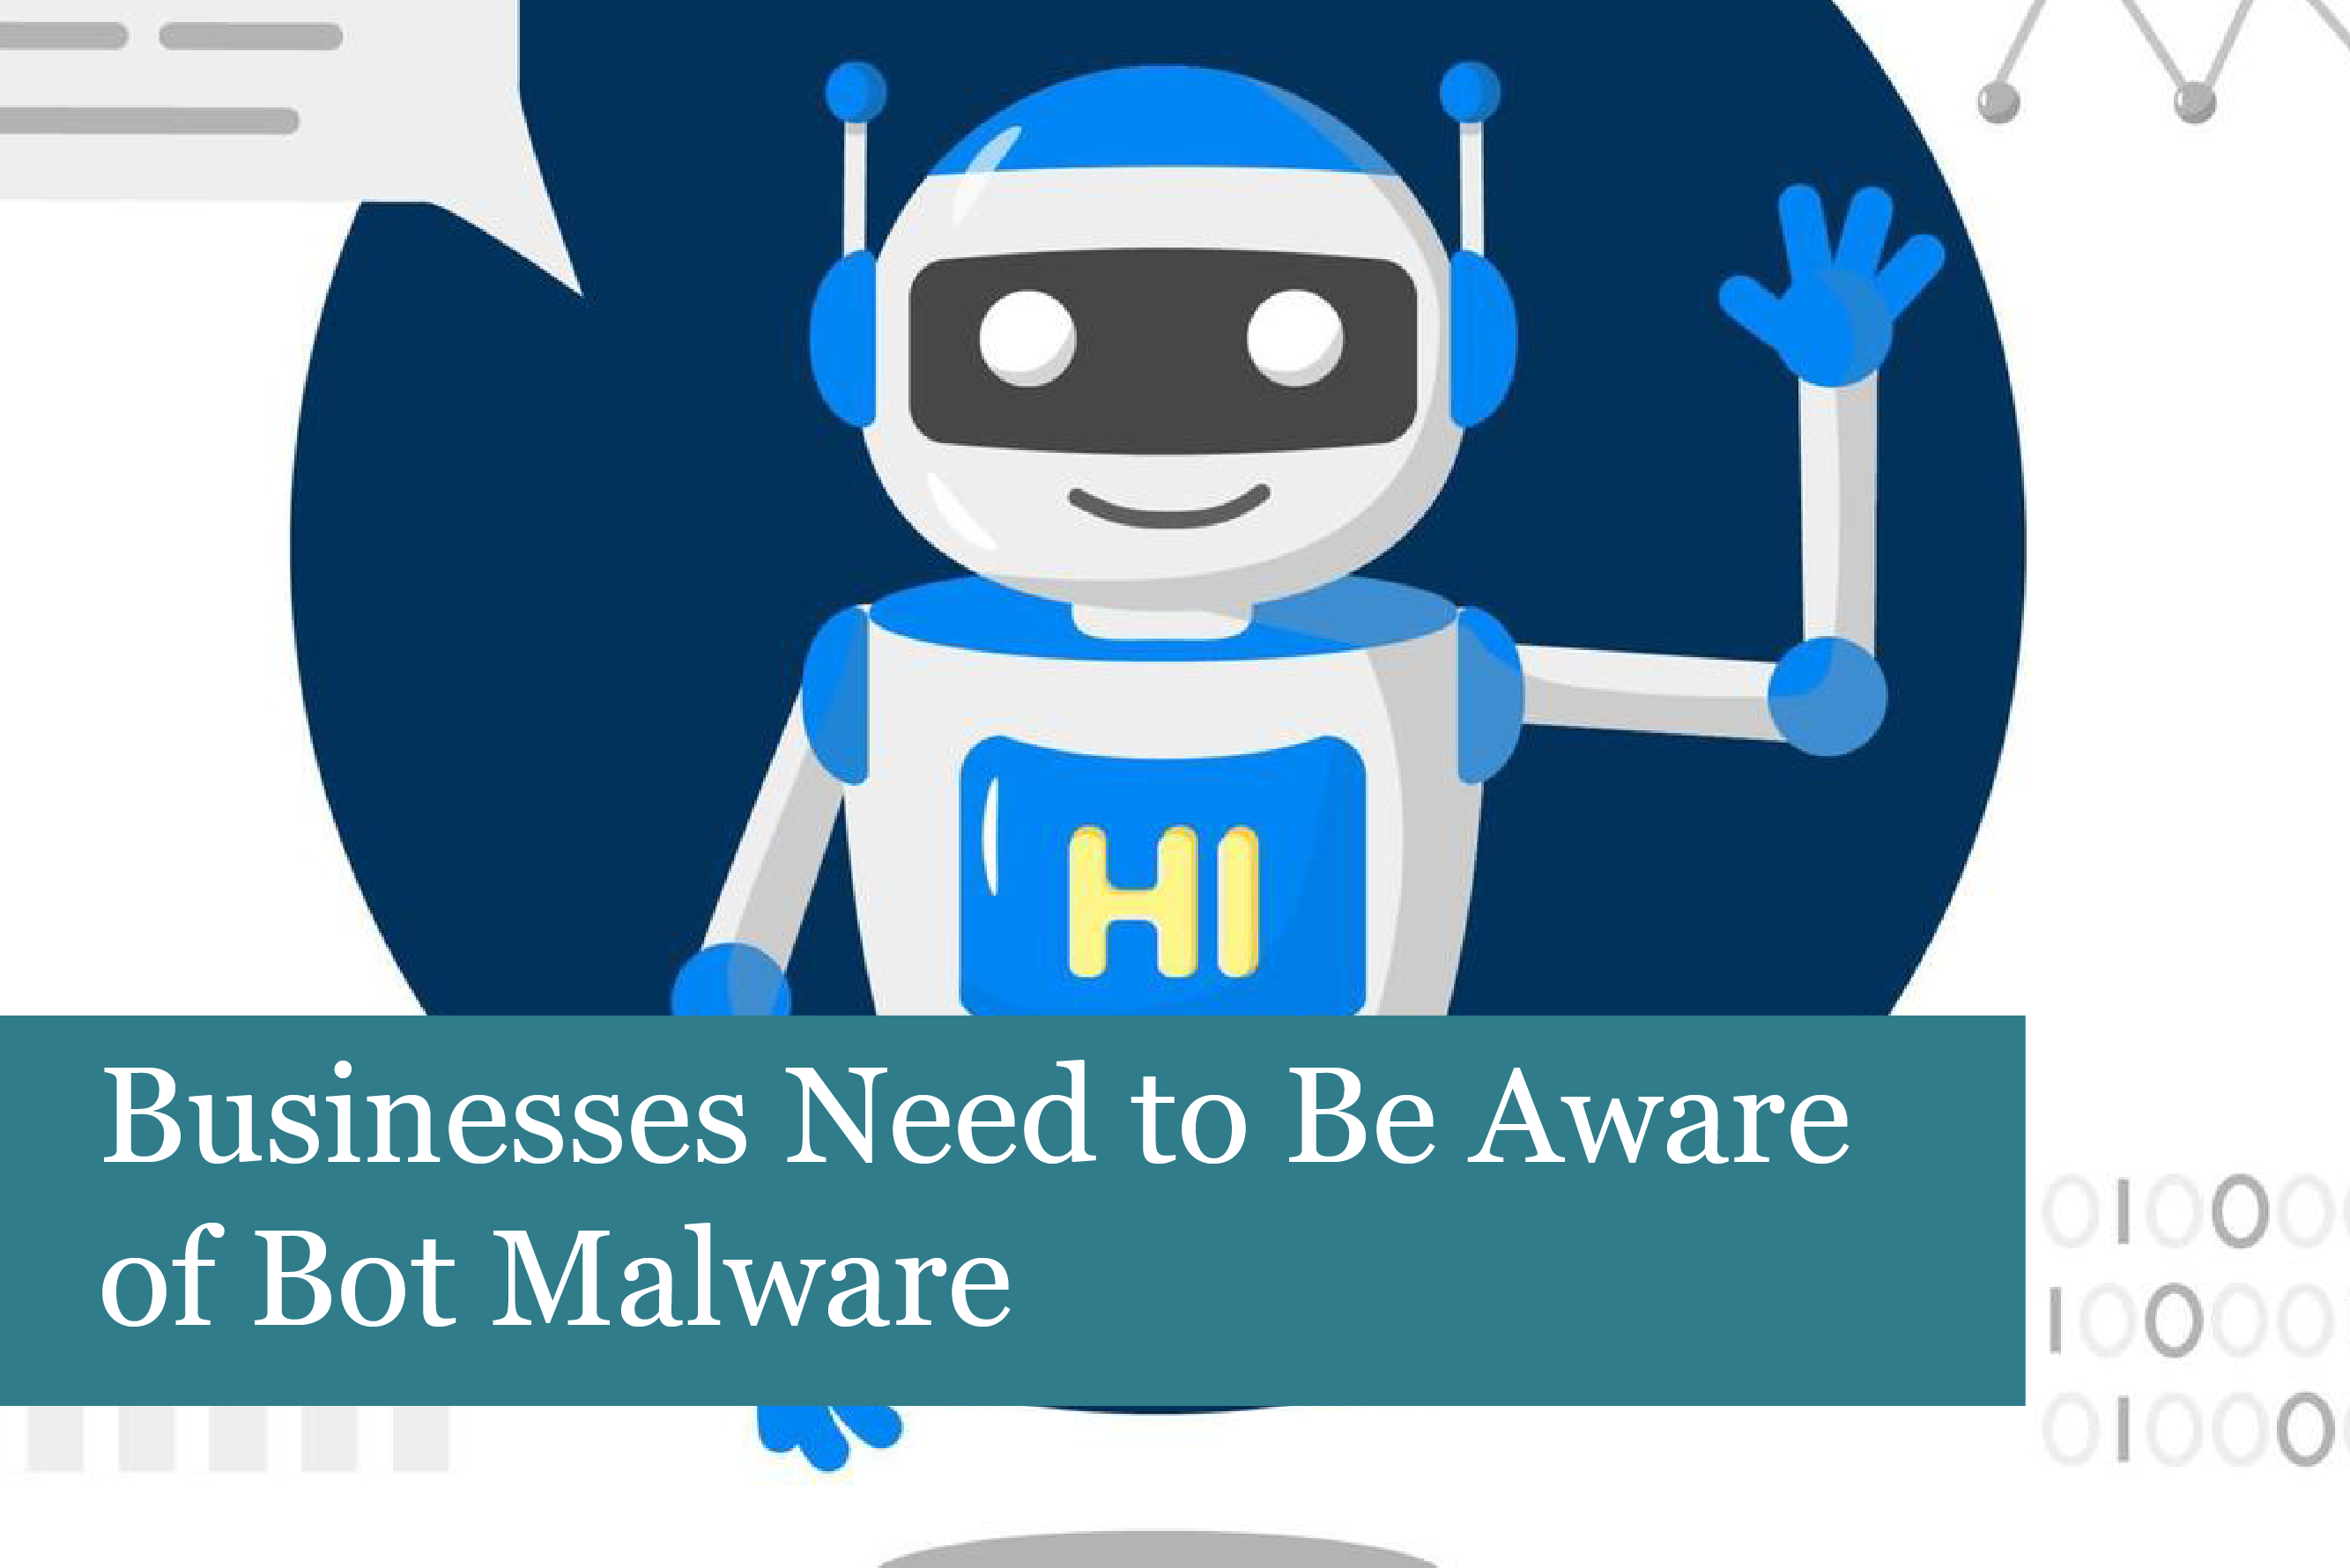 Businesses Need to Be Aware of Bot Malware – a Growing Security Threat